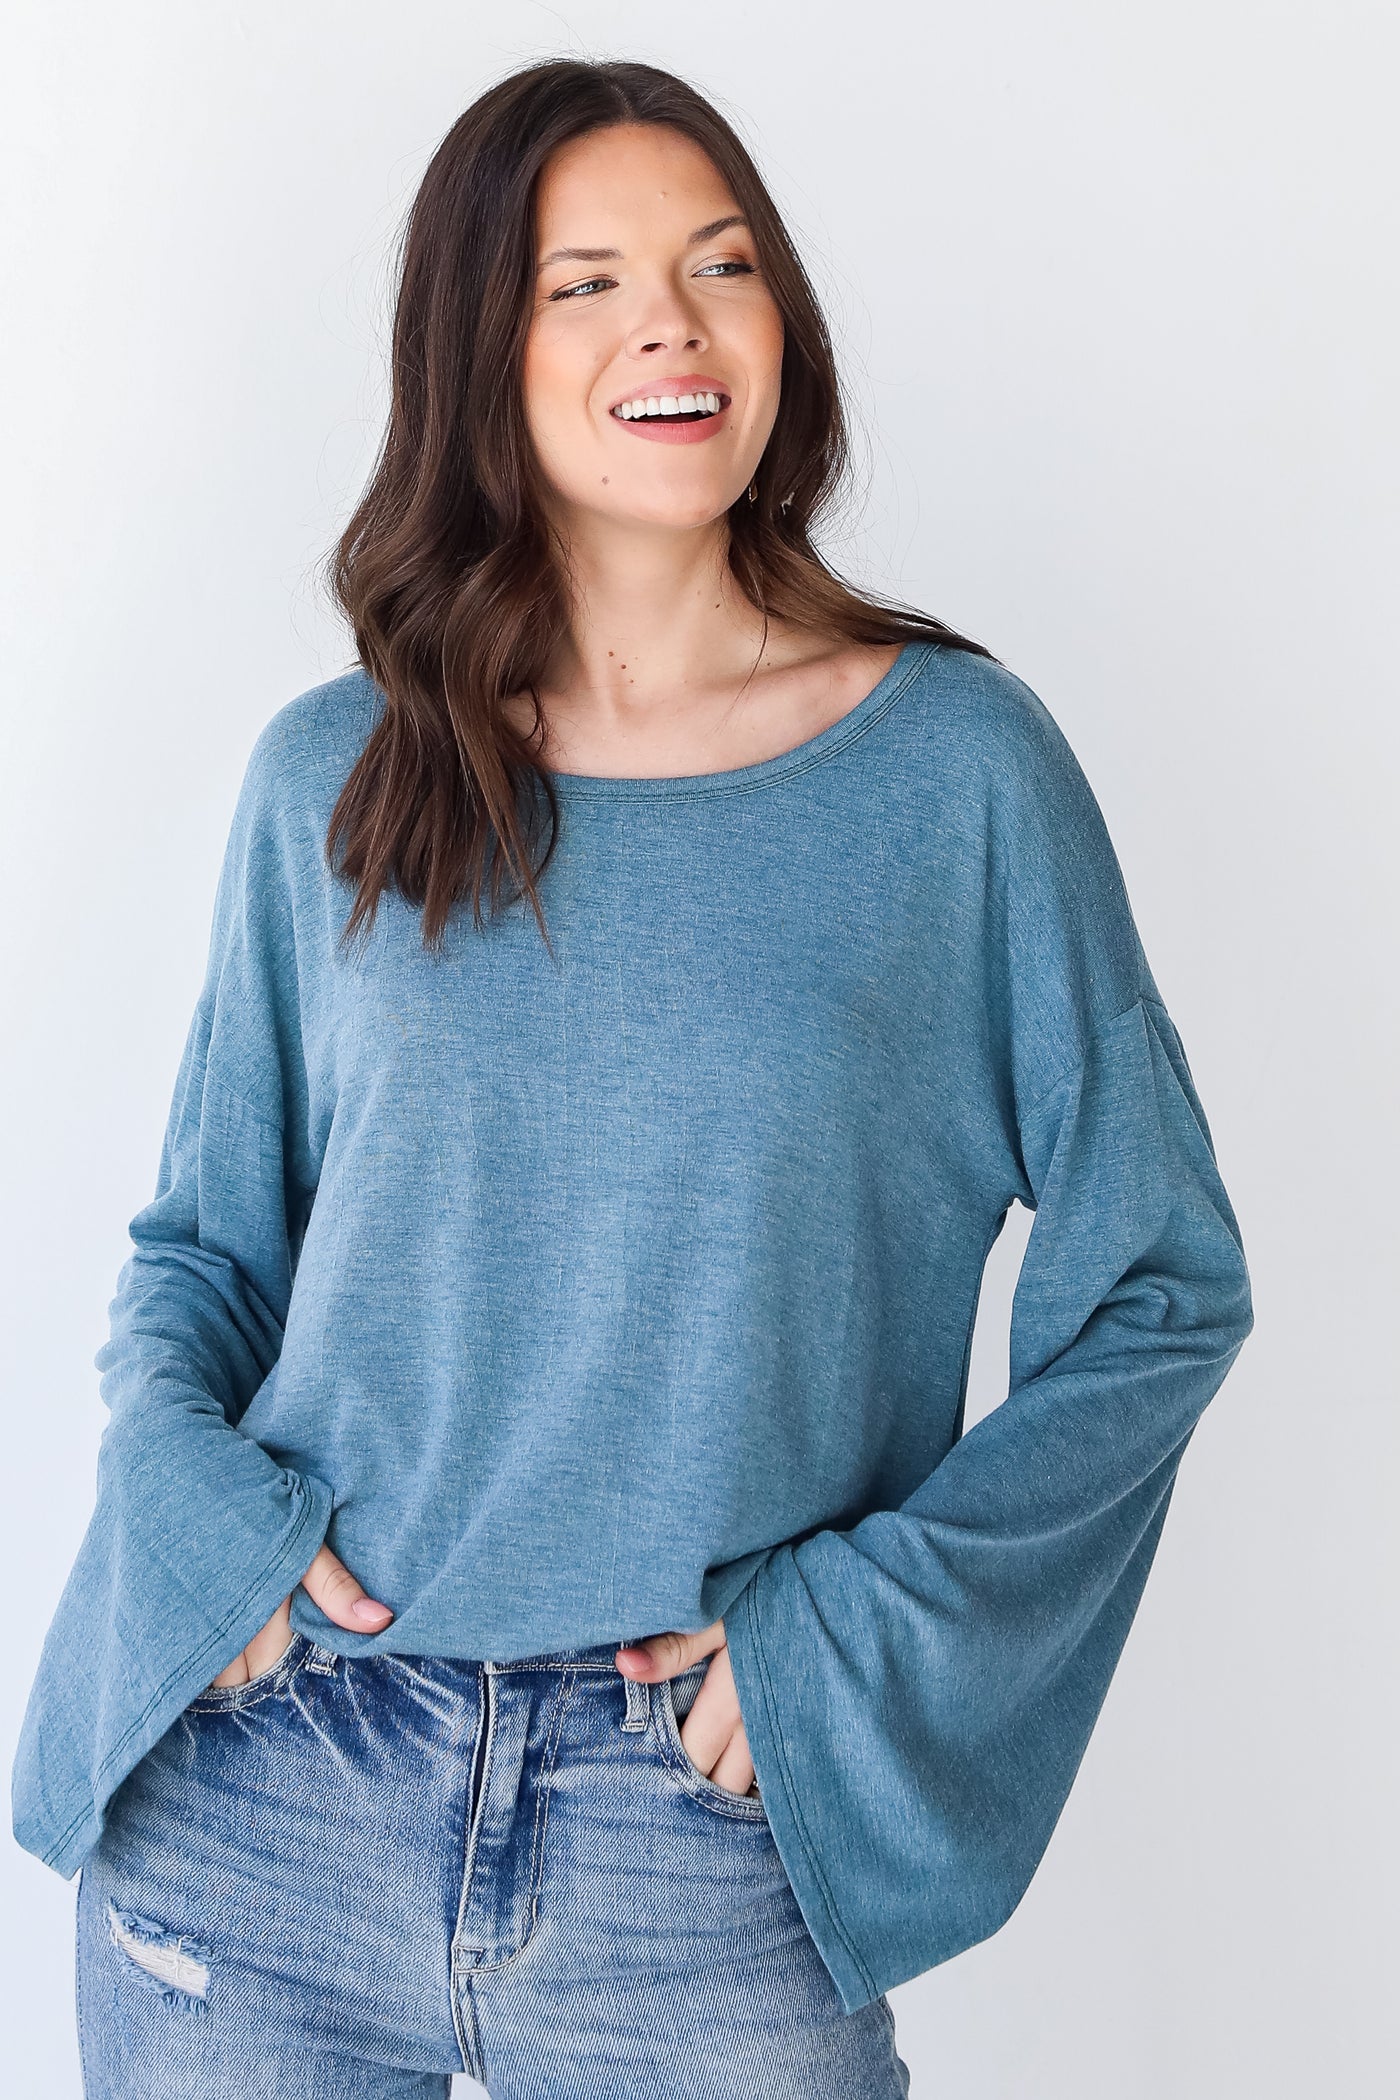 Knit Top in teal on model